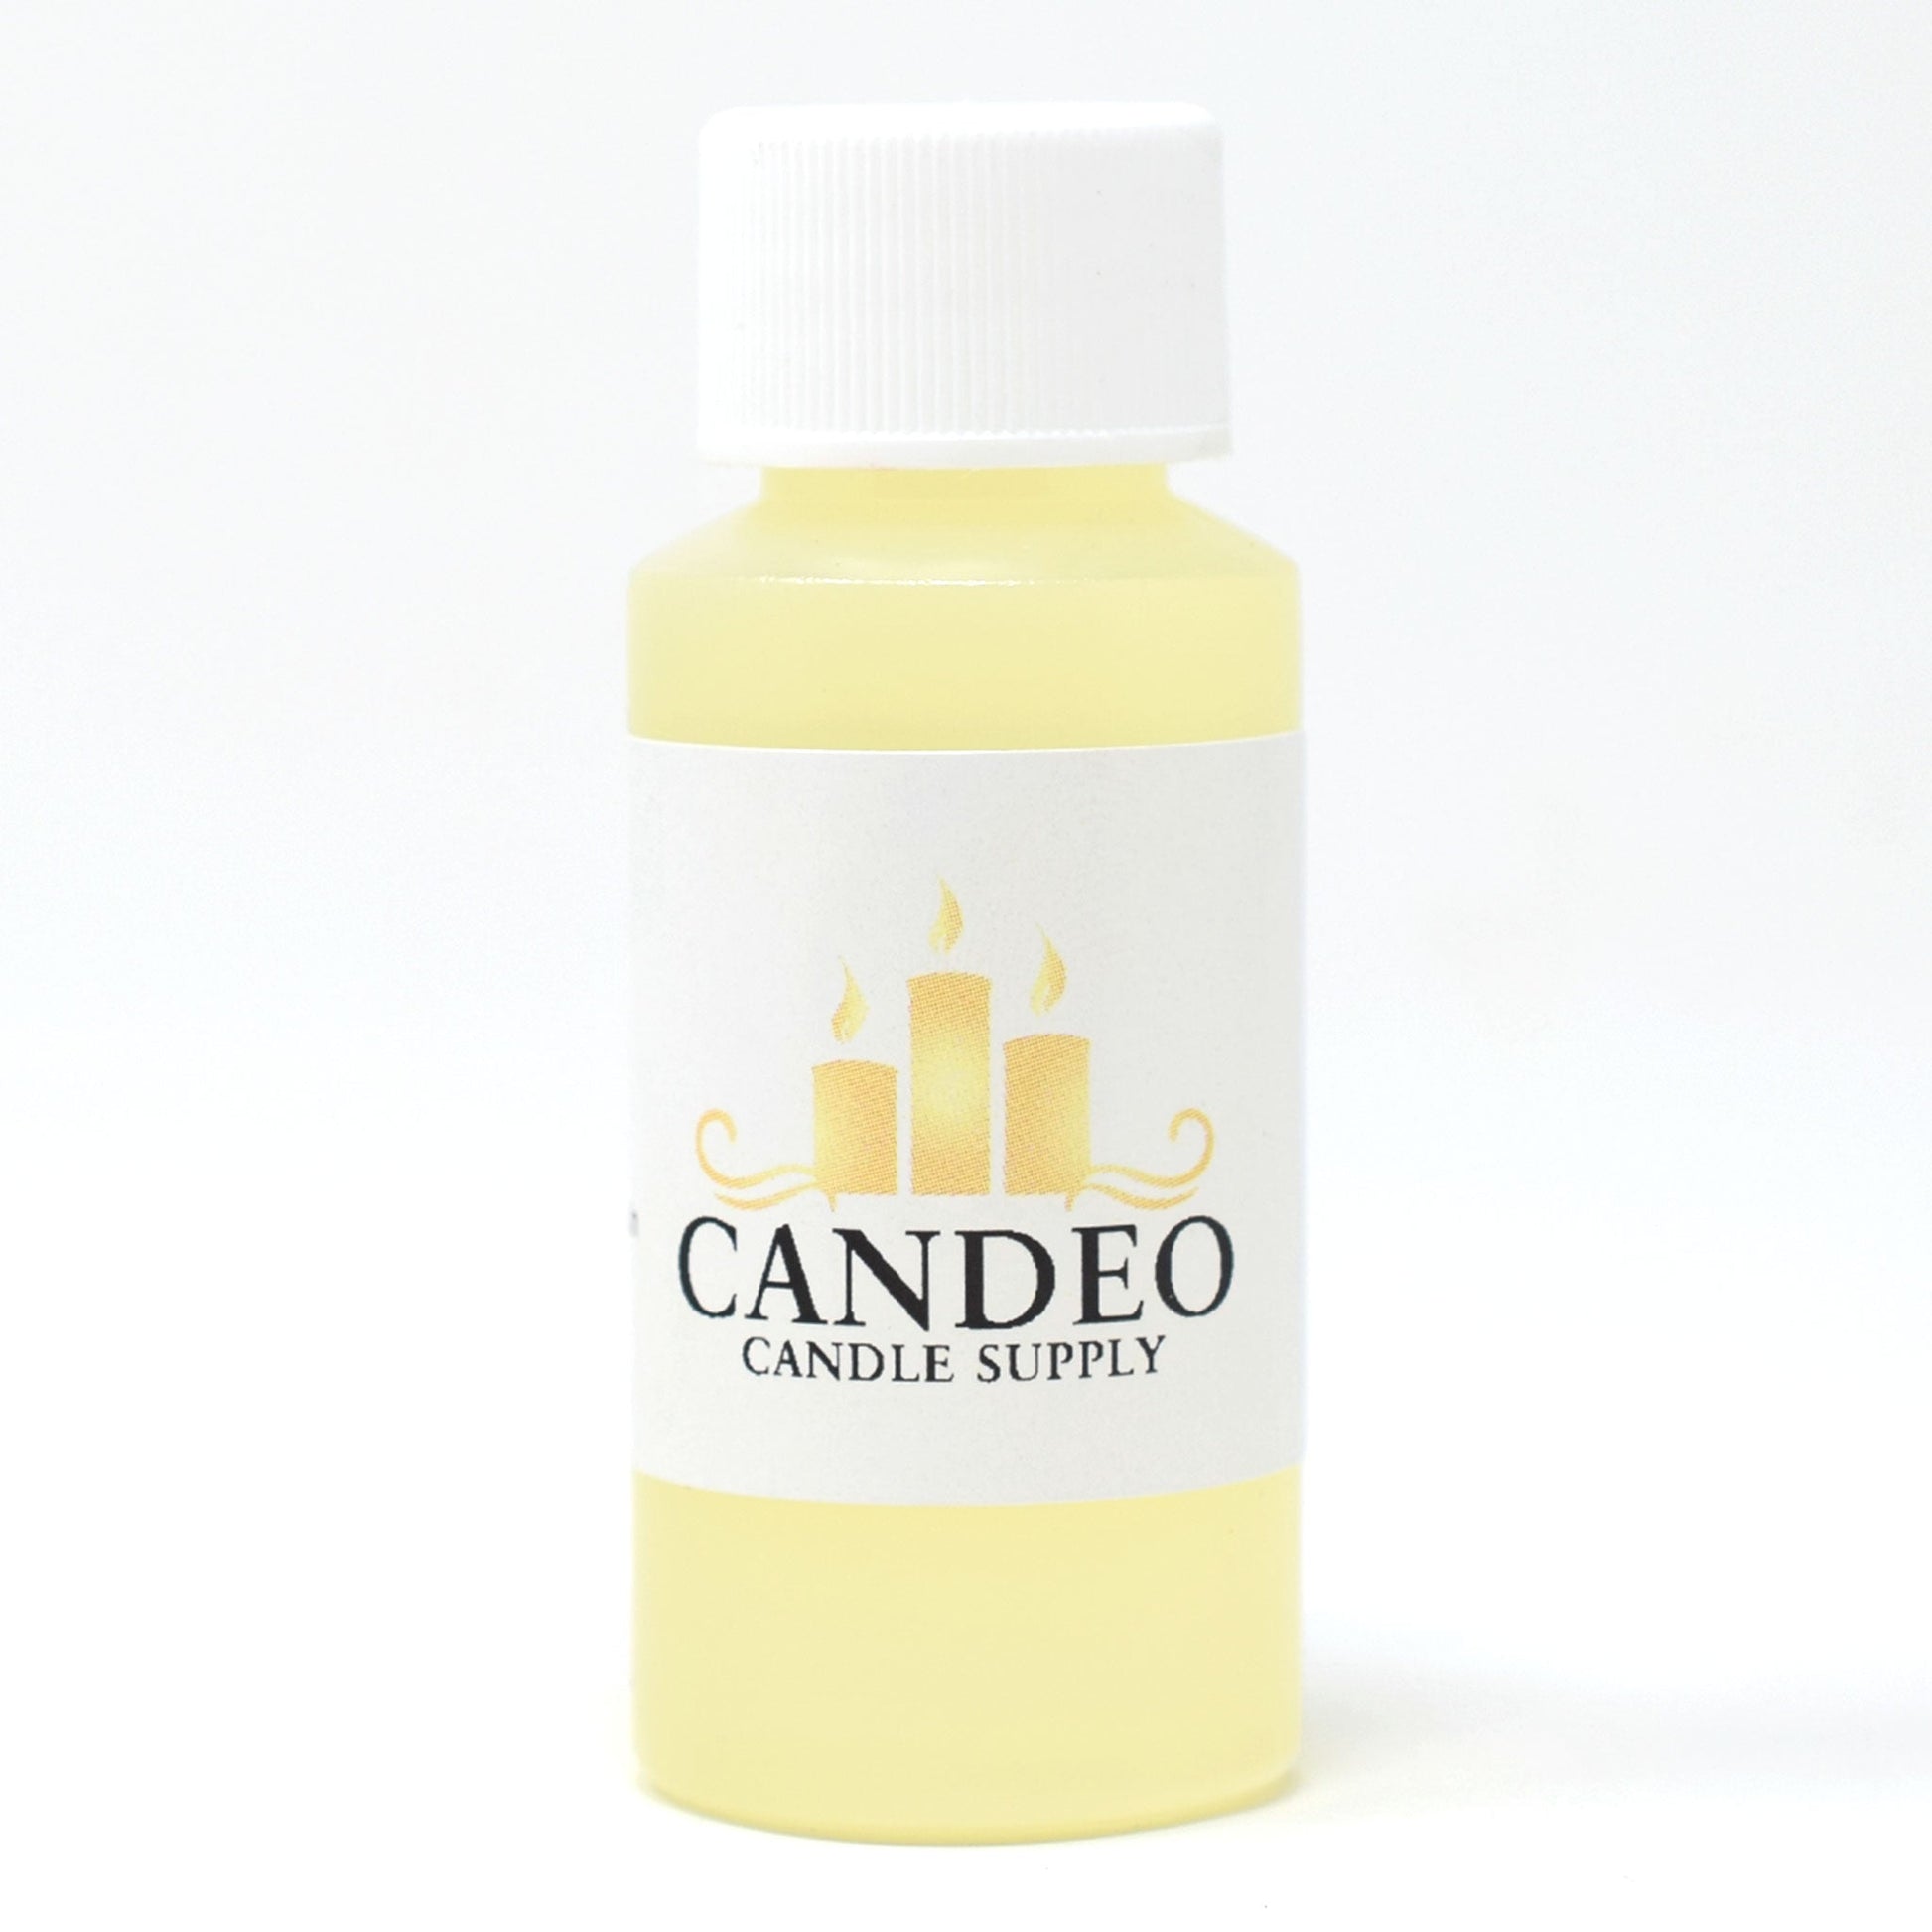 Ocean Breeze Fragrance Oil - Candeo Candle Supply